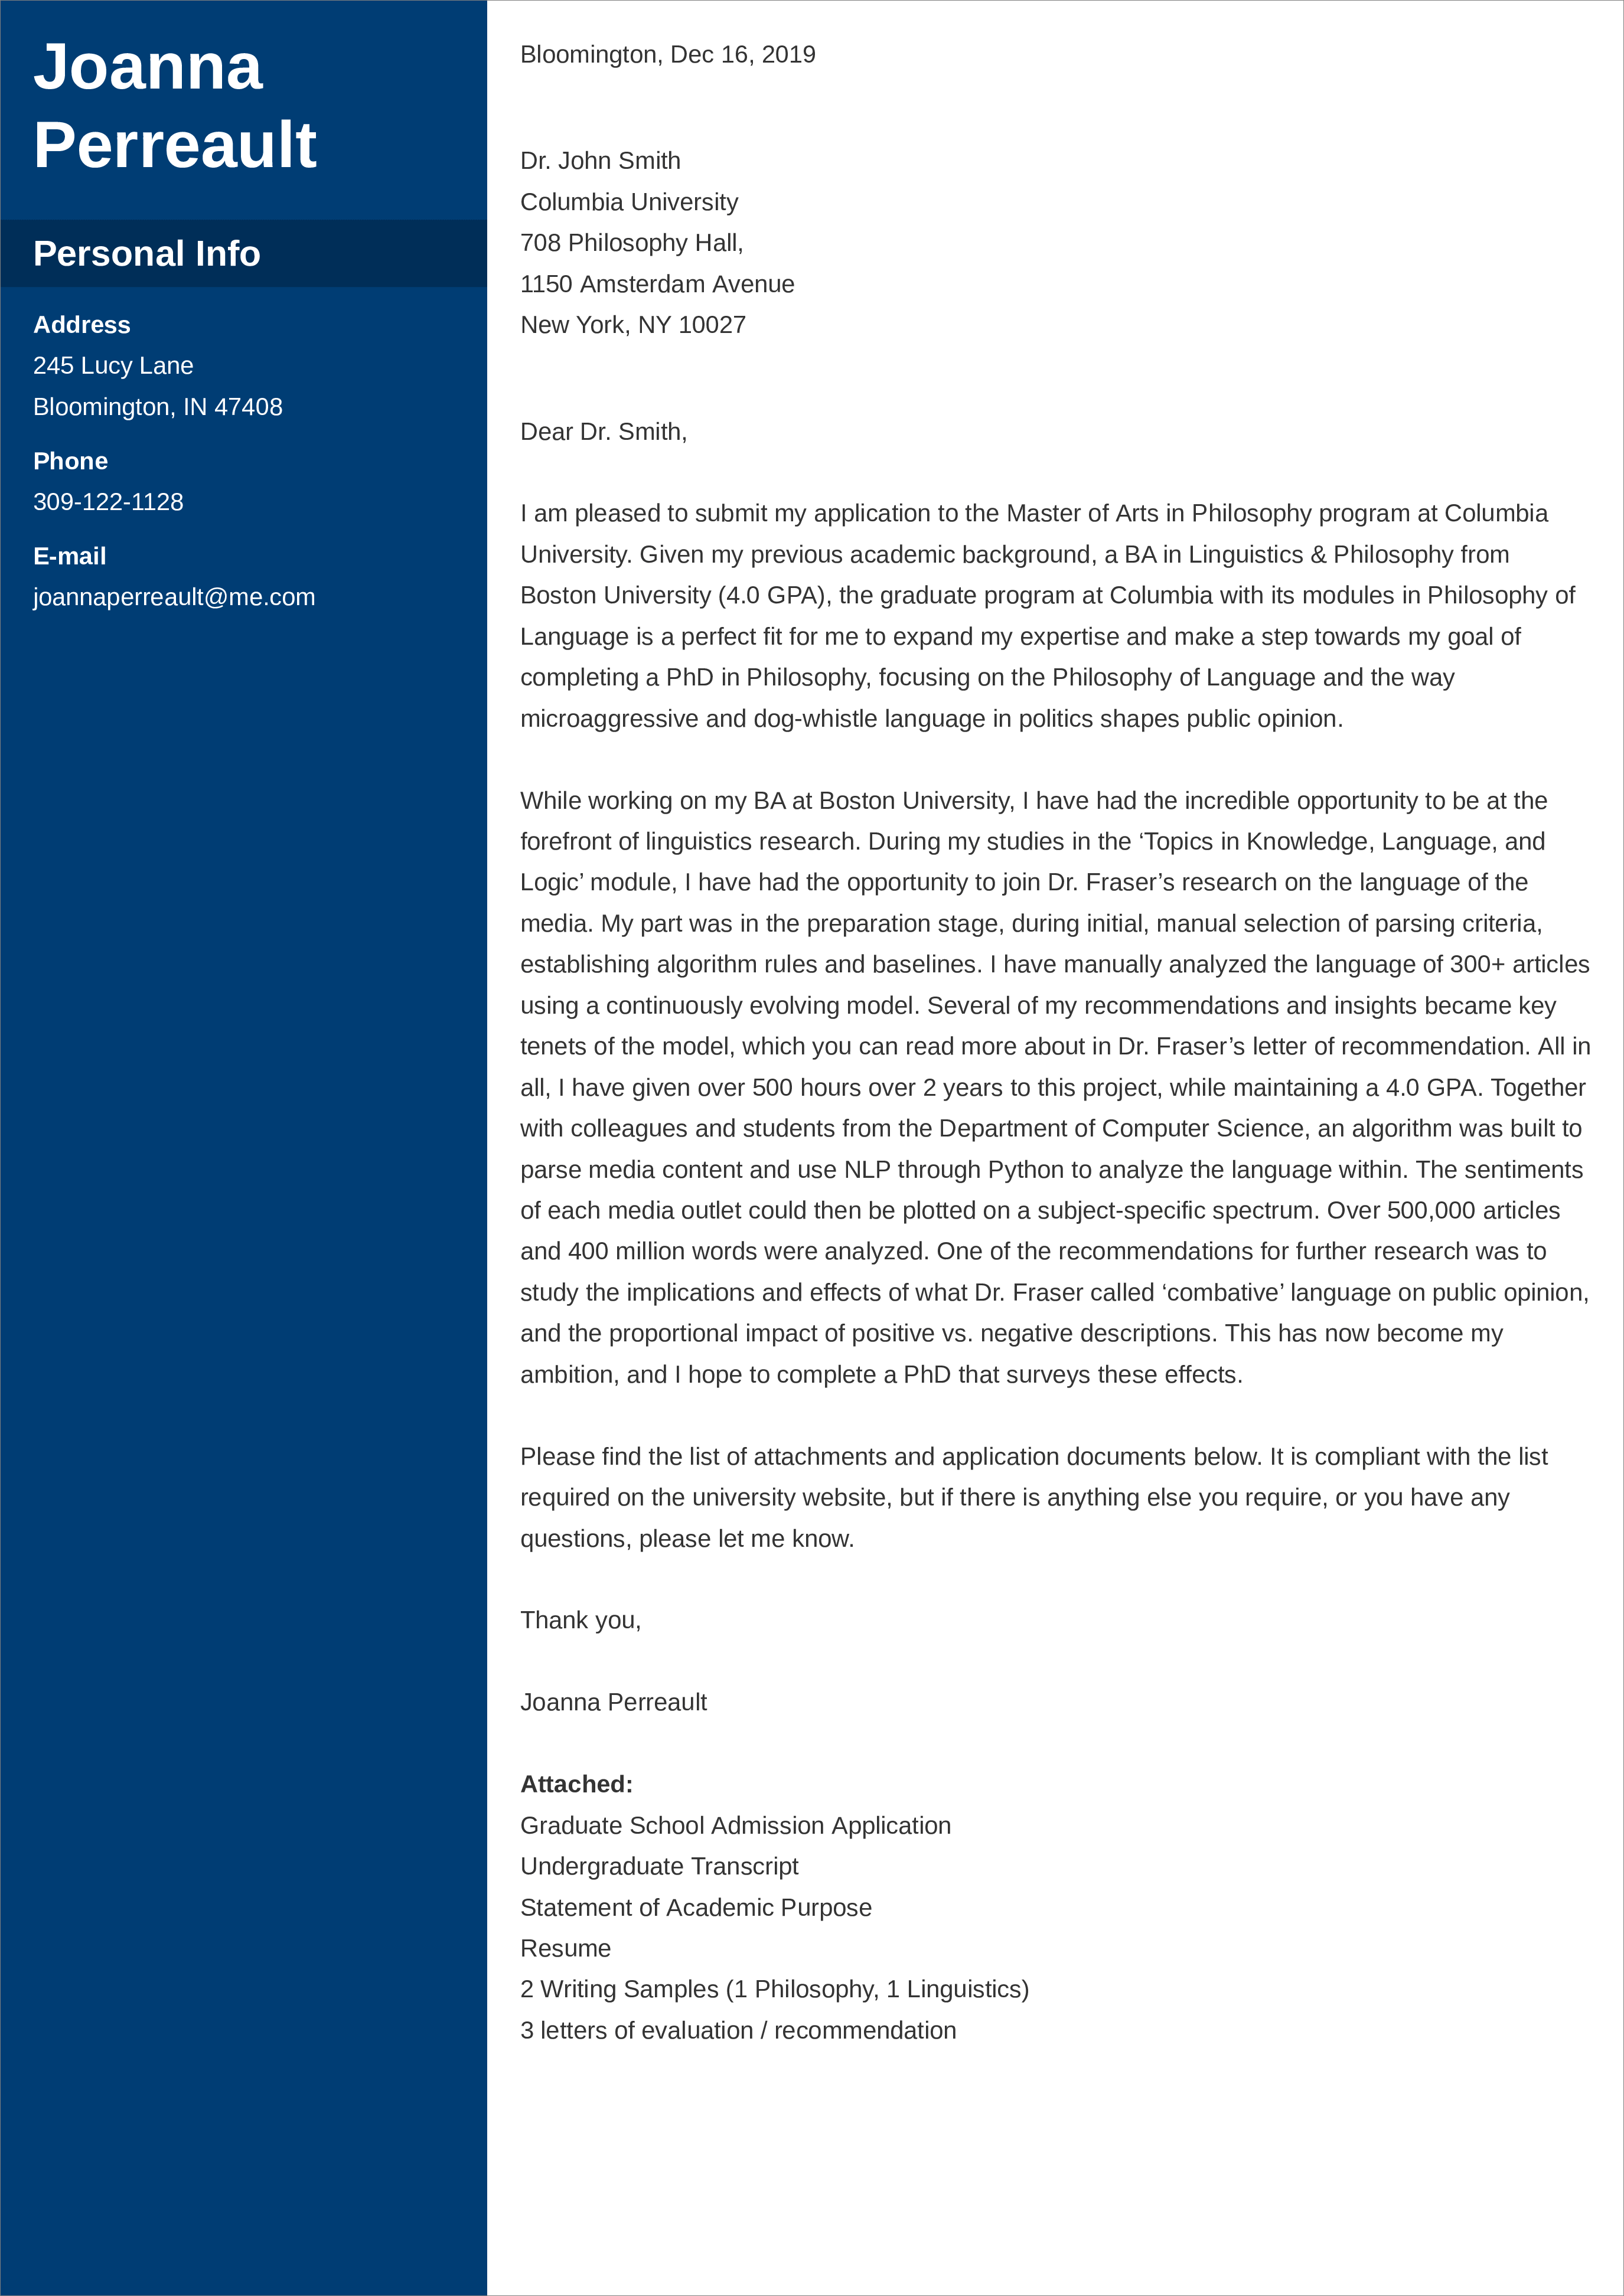 Cover letter for academic admissions